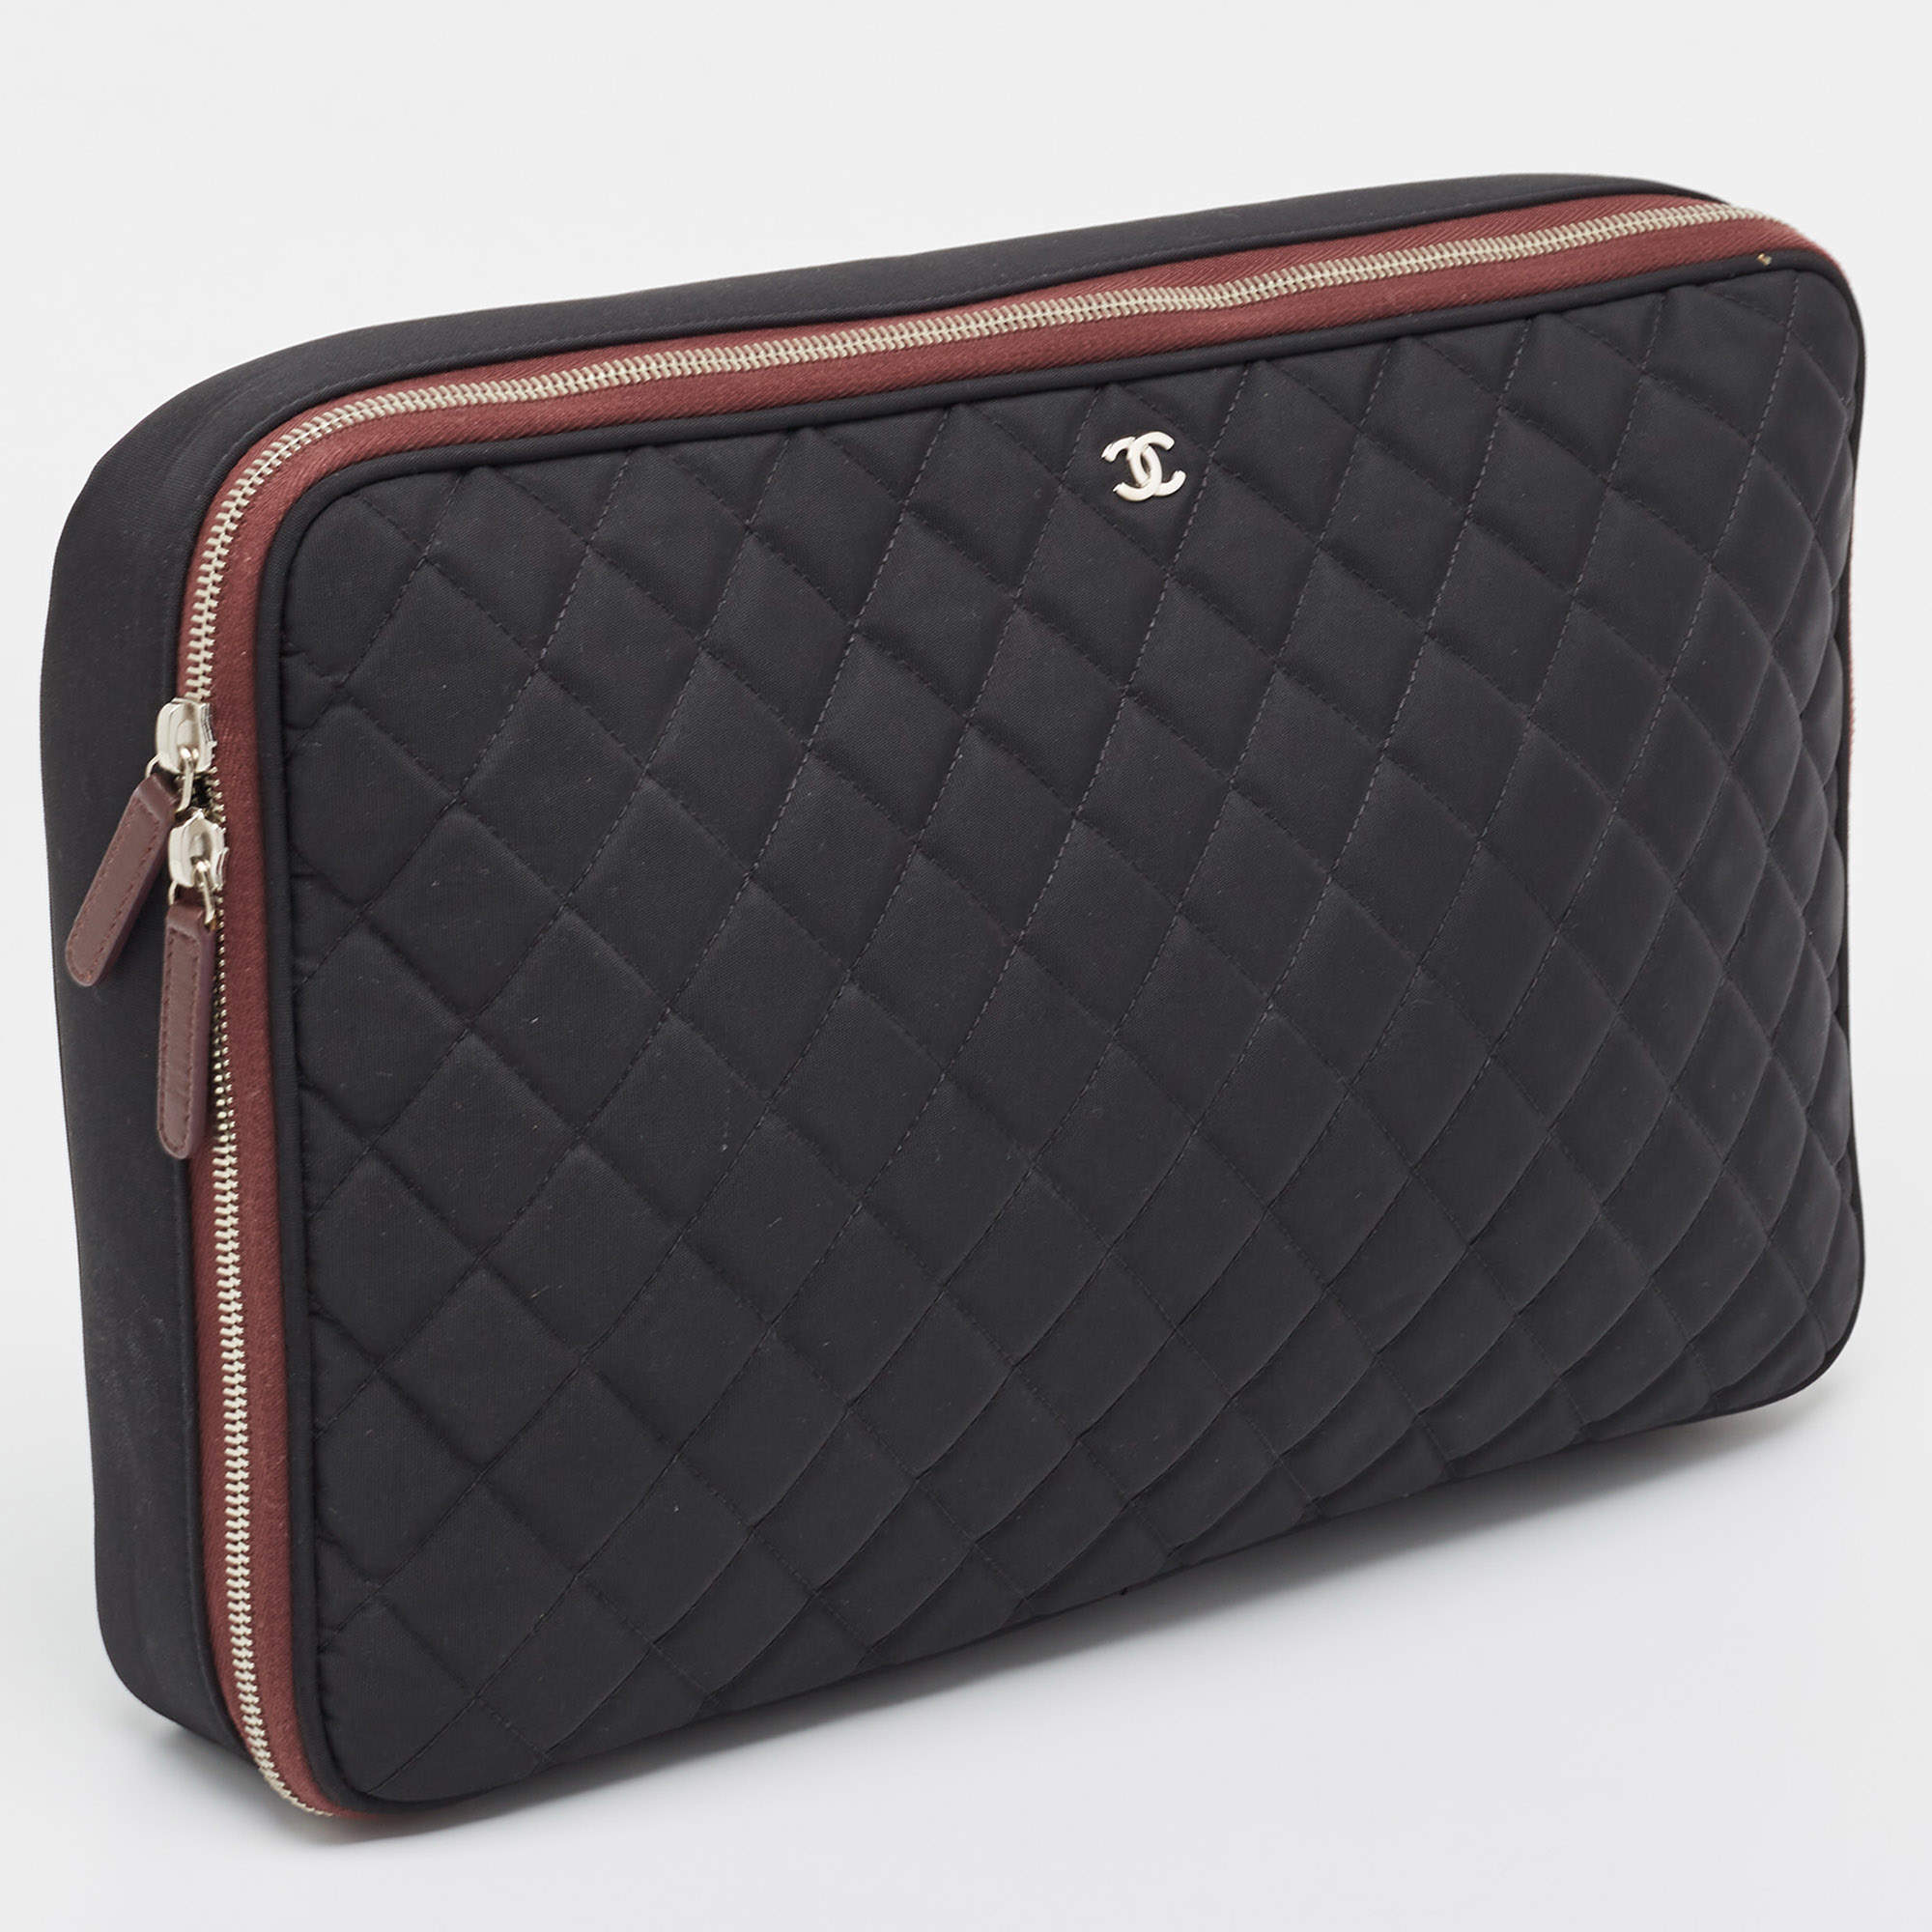 Chanel Black Quilted Nylon Laptop Sleeve